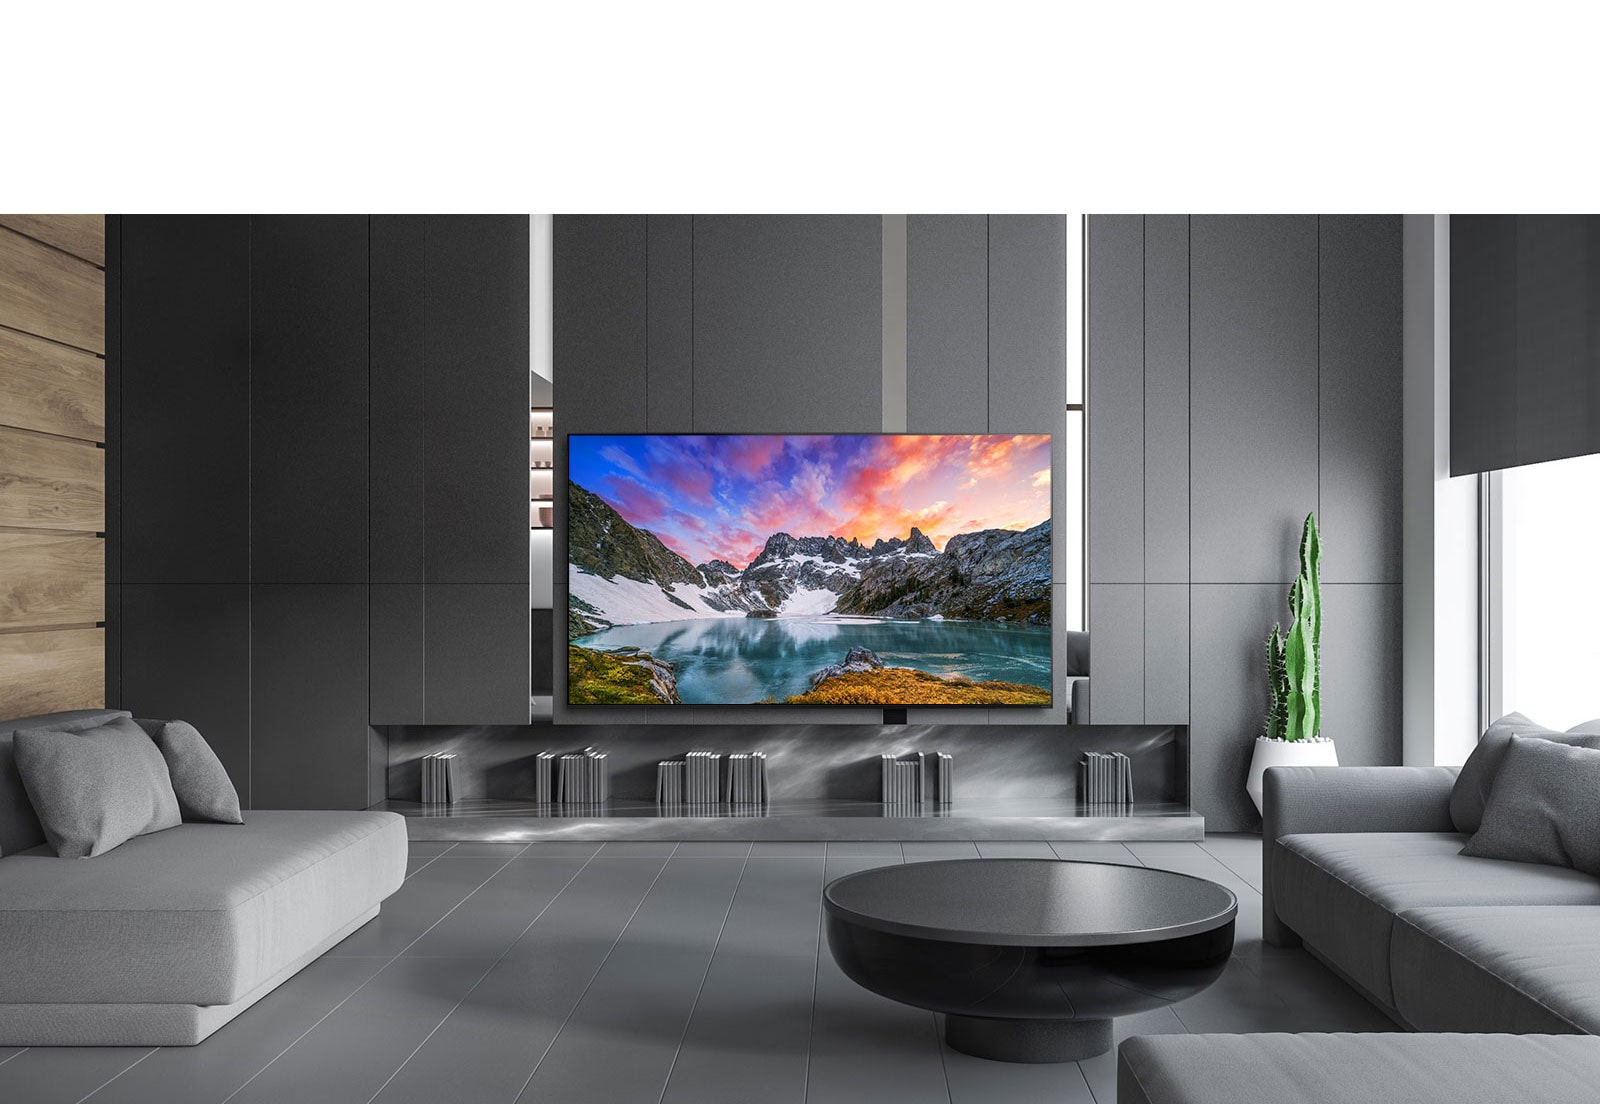 TV showing an eye level view of nature in a luxurious house setting